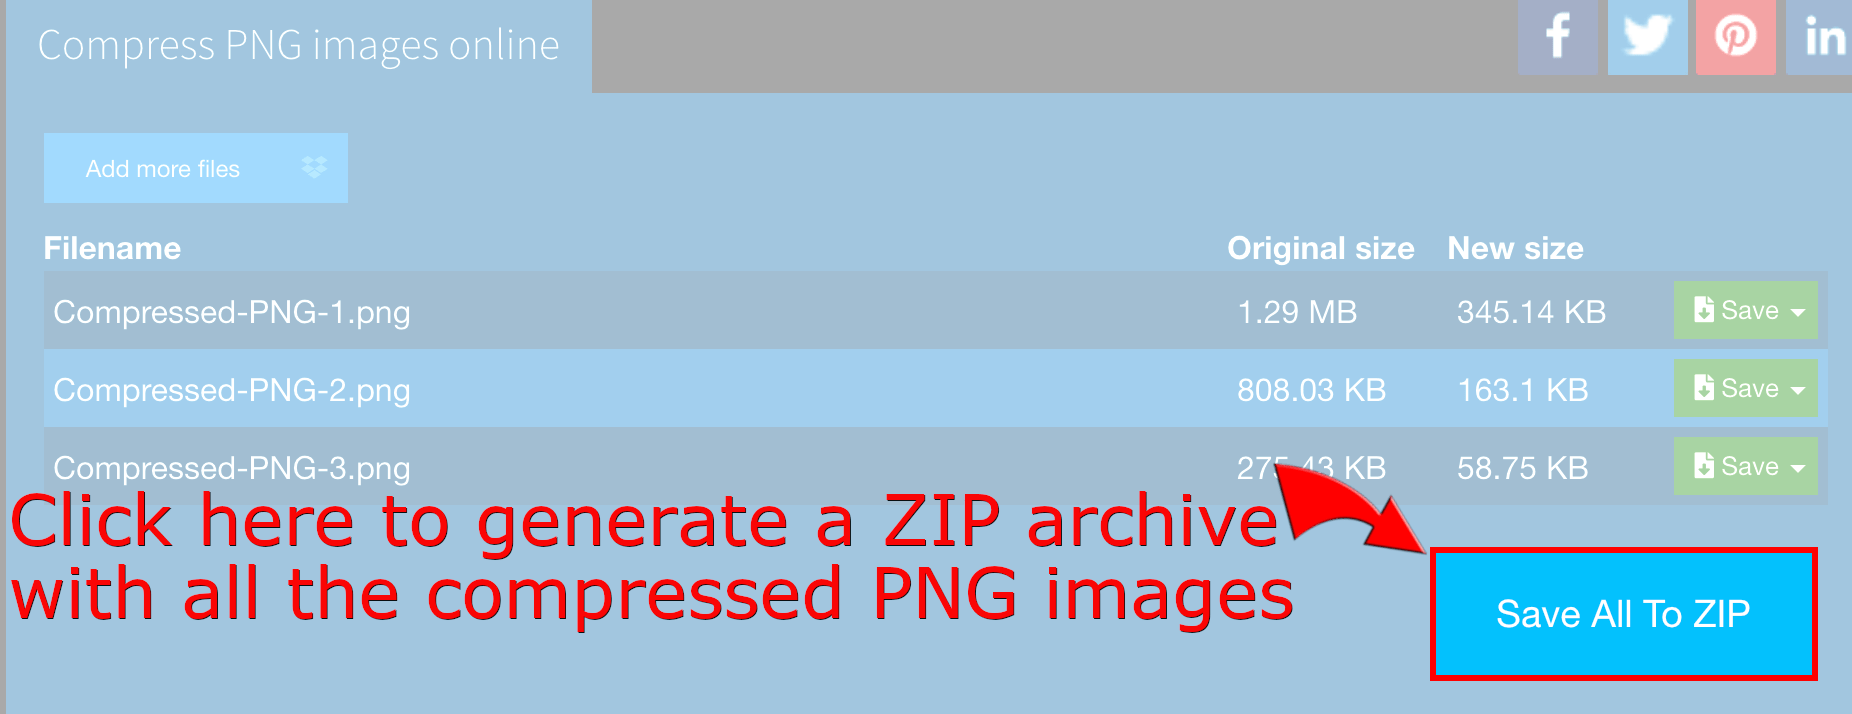 Click here to generate ZIP file with all compressed PNG images